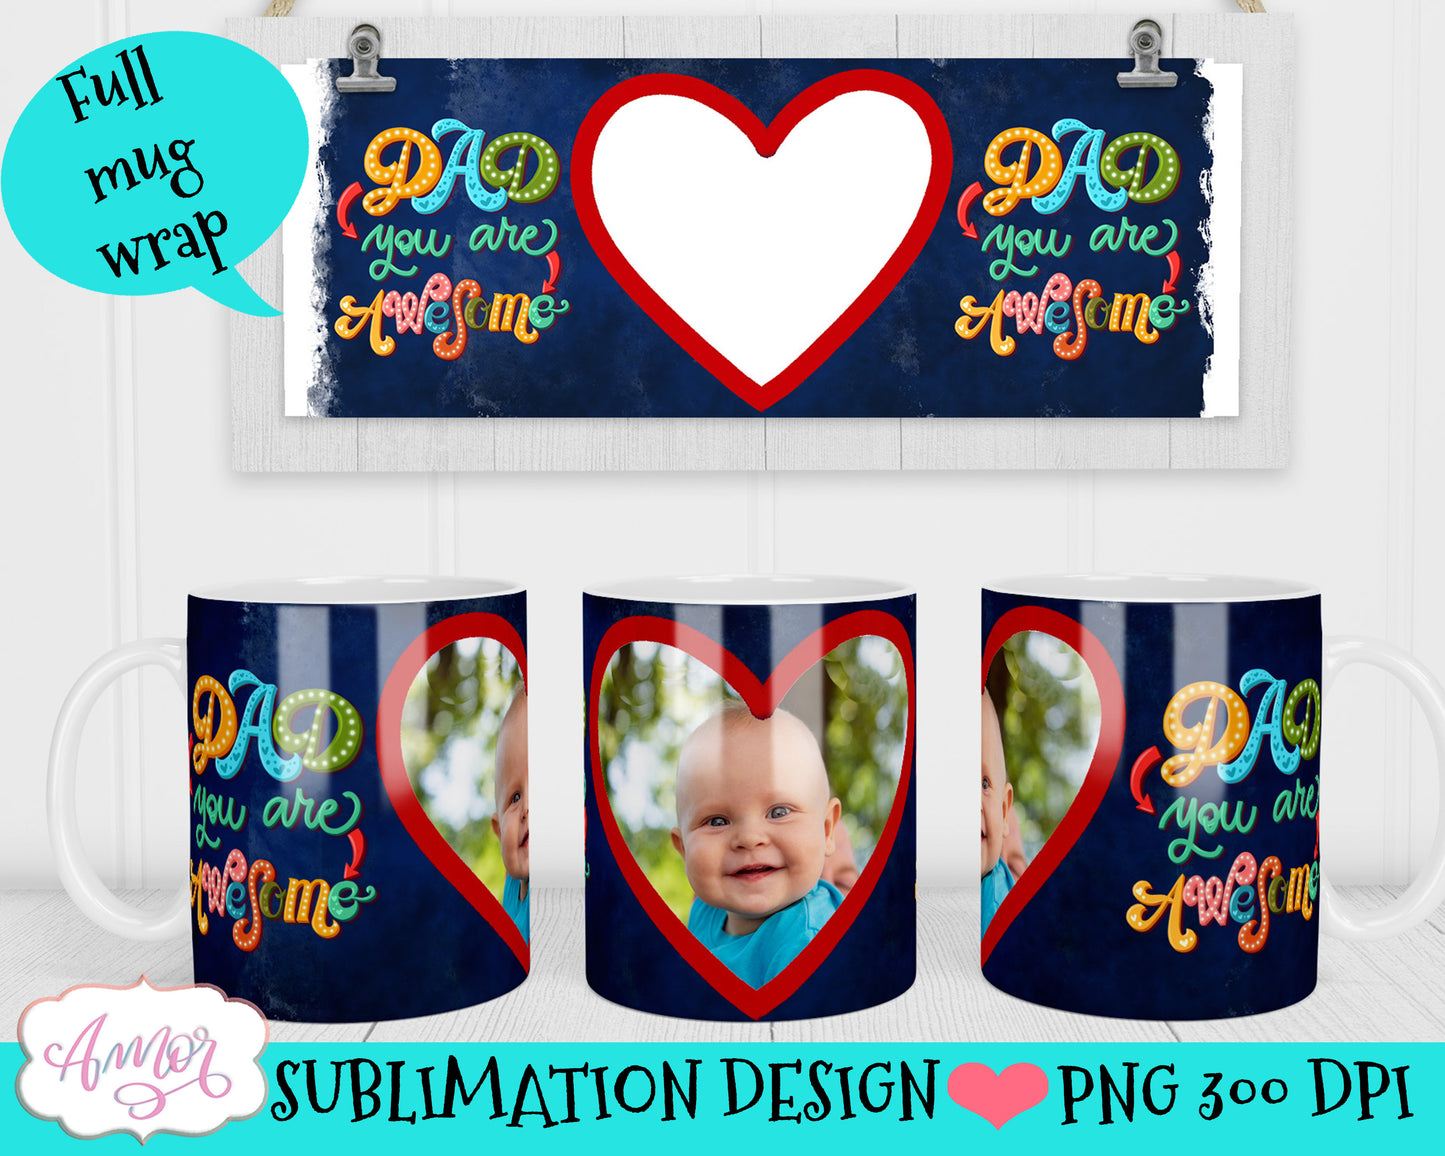 Photo mug wrap sublimation design for Father's day